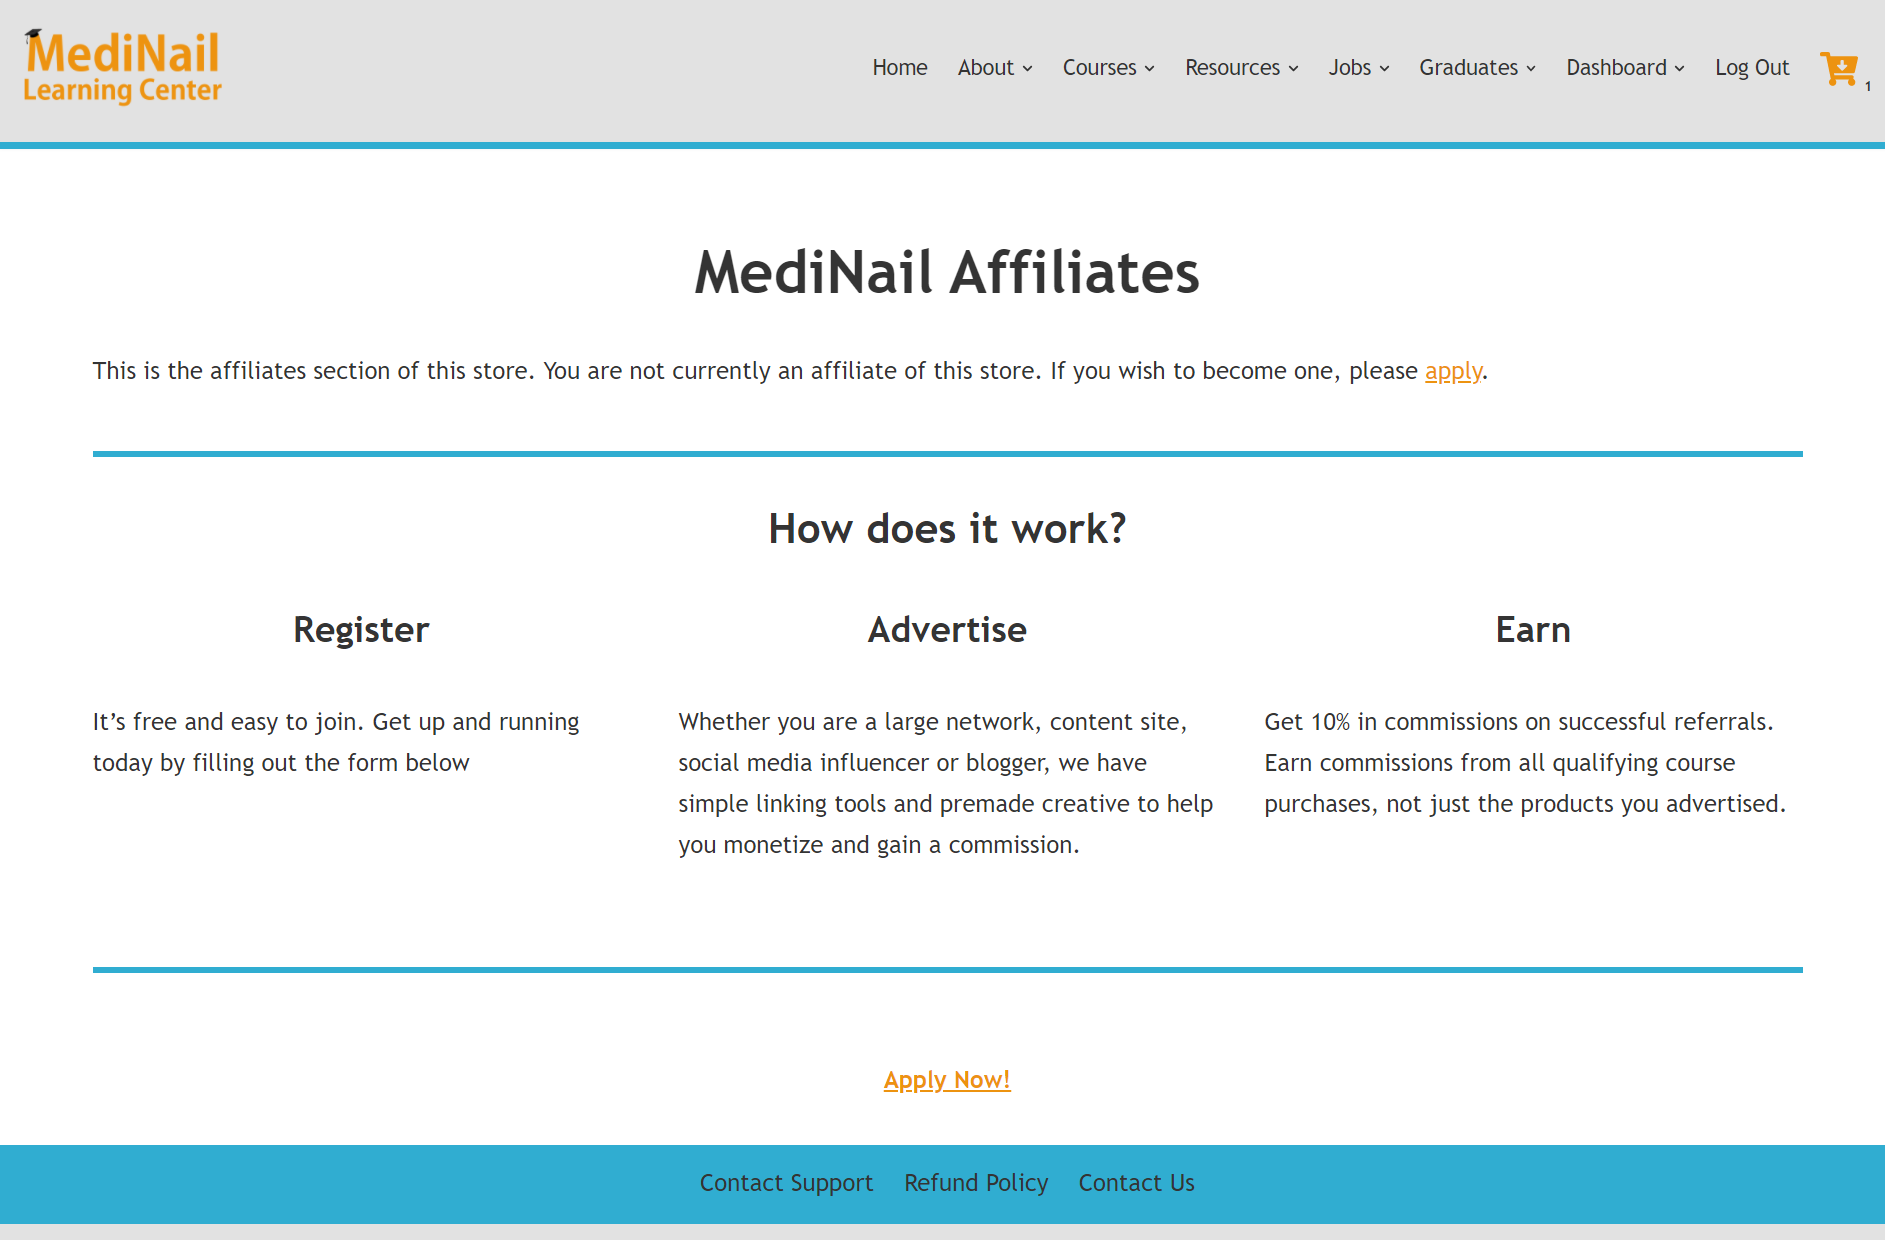 Getting Started As A MediNail Affiliate